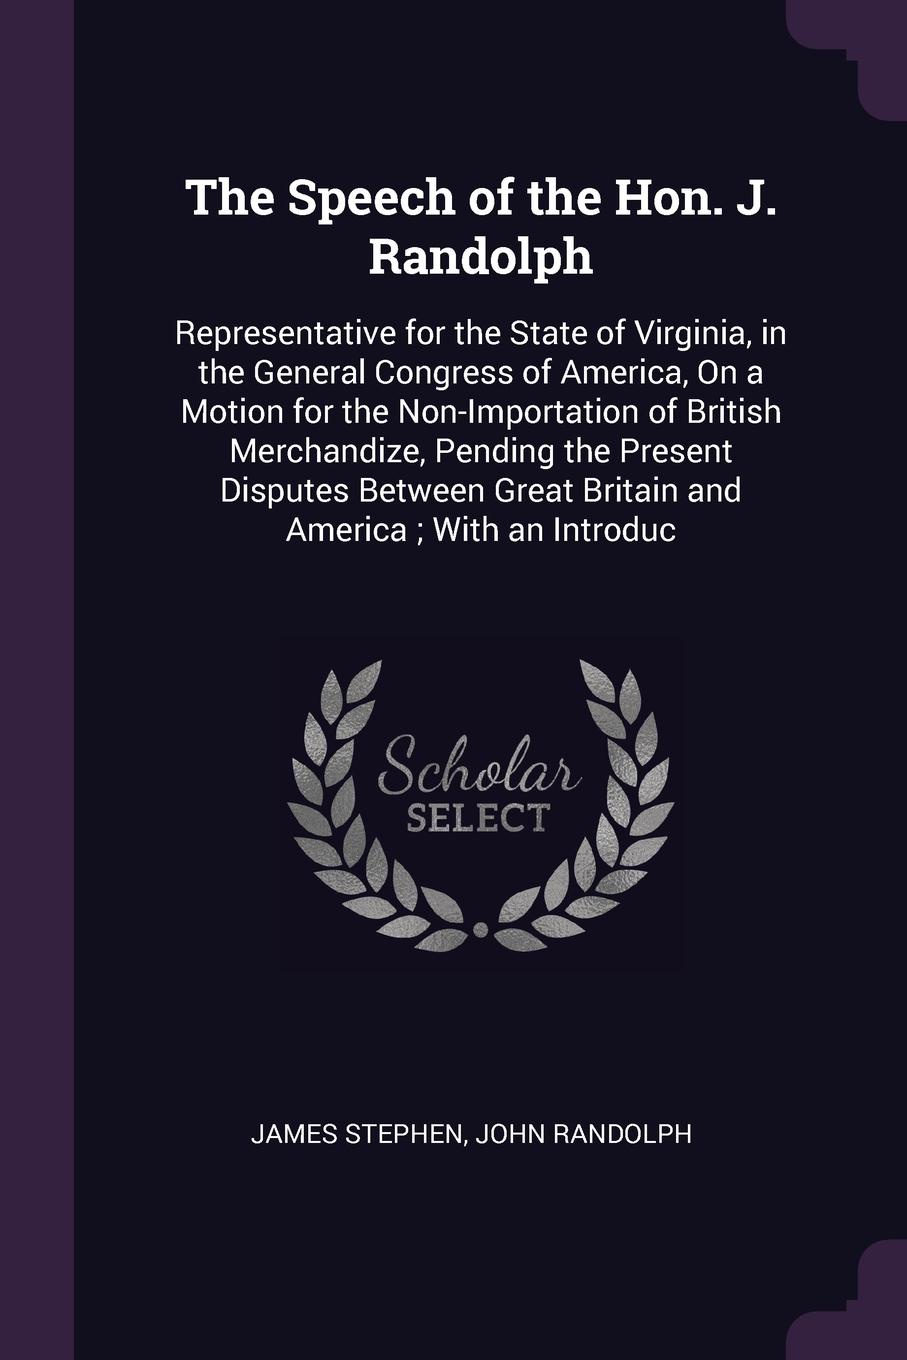 The Speech of the Hon. J. Randolph. Representative for the State of Virginia, in the General Congress of America, On a Motion for the Non-Importation of British Merchandize, Pending the Present Disputes Between Great Britain and America ; With an ...